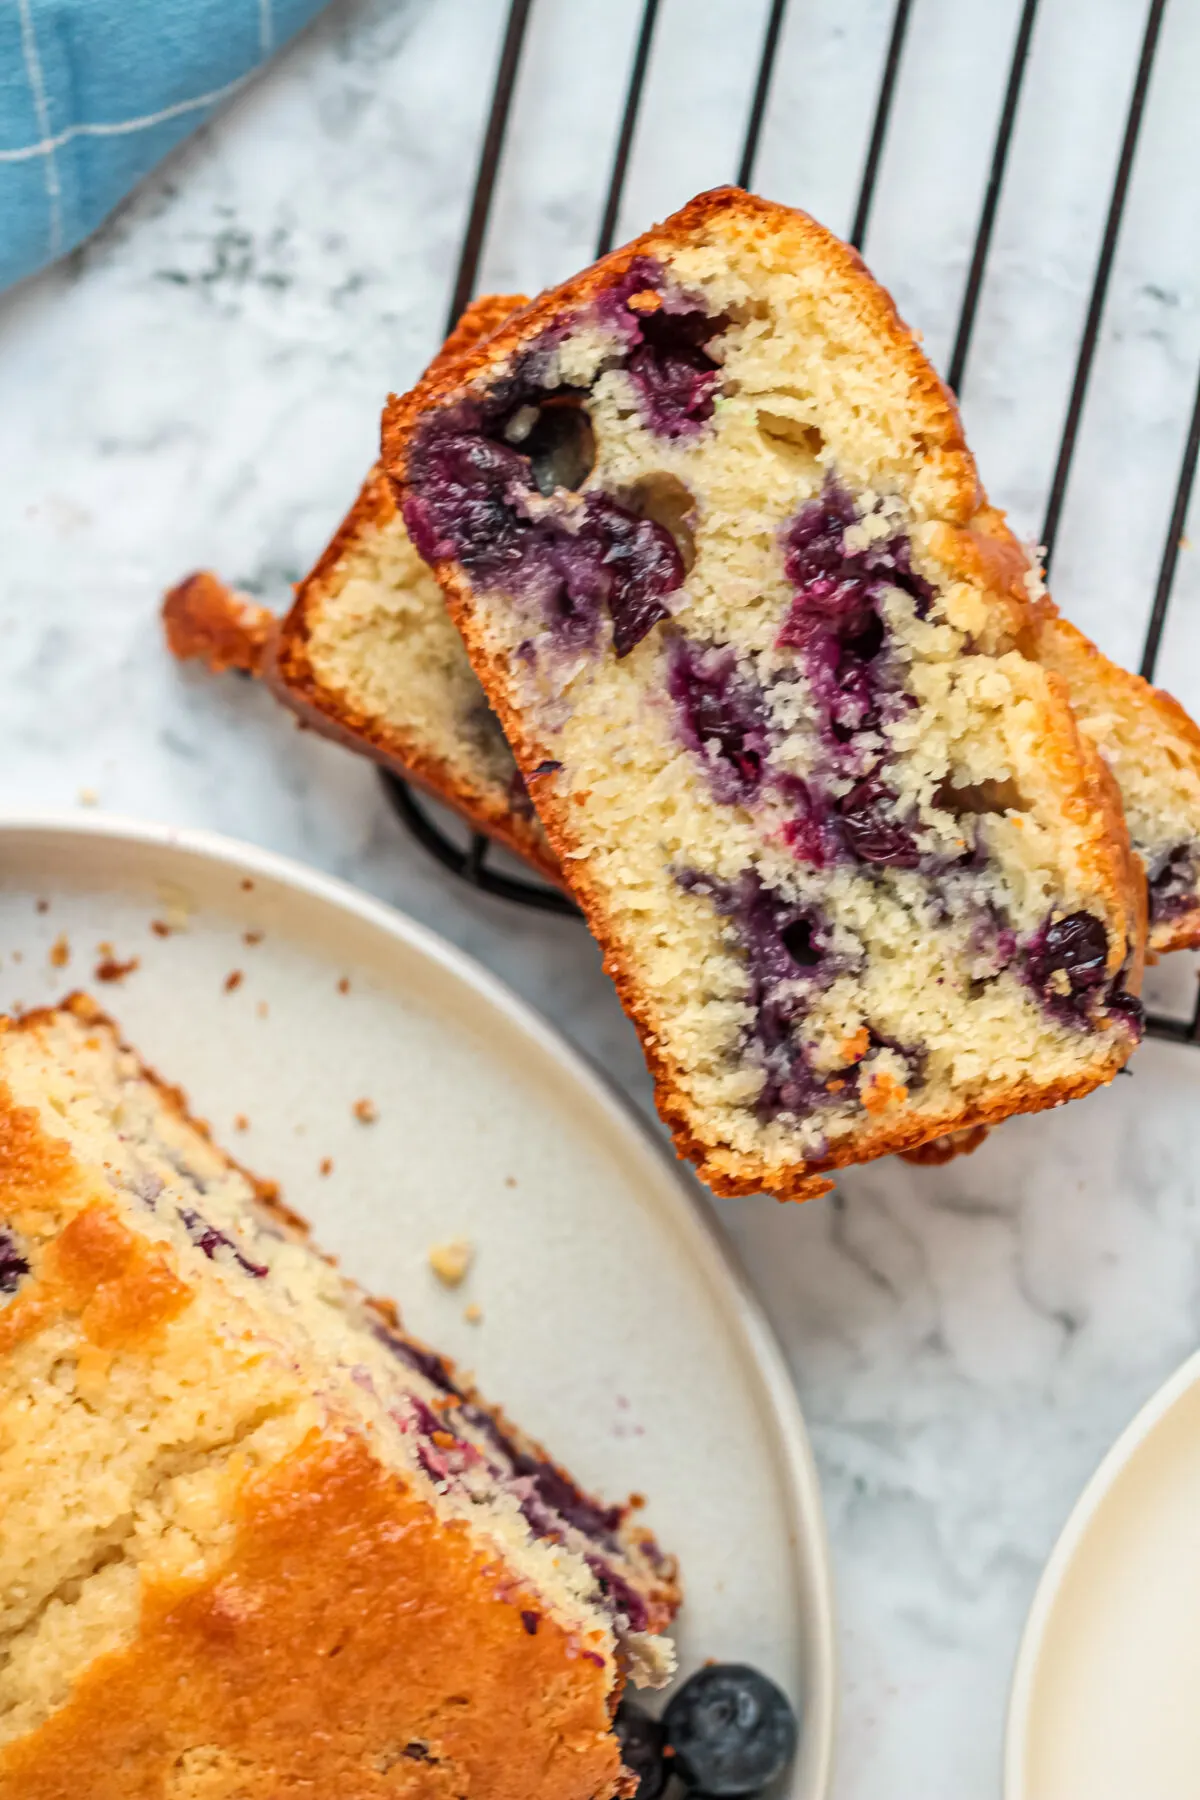 This Blueberry Muffin Bread is a favourite blueberry bread recipe in our family that is moist, fluffy and packed full of juicy blueberries.